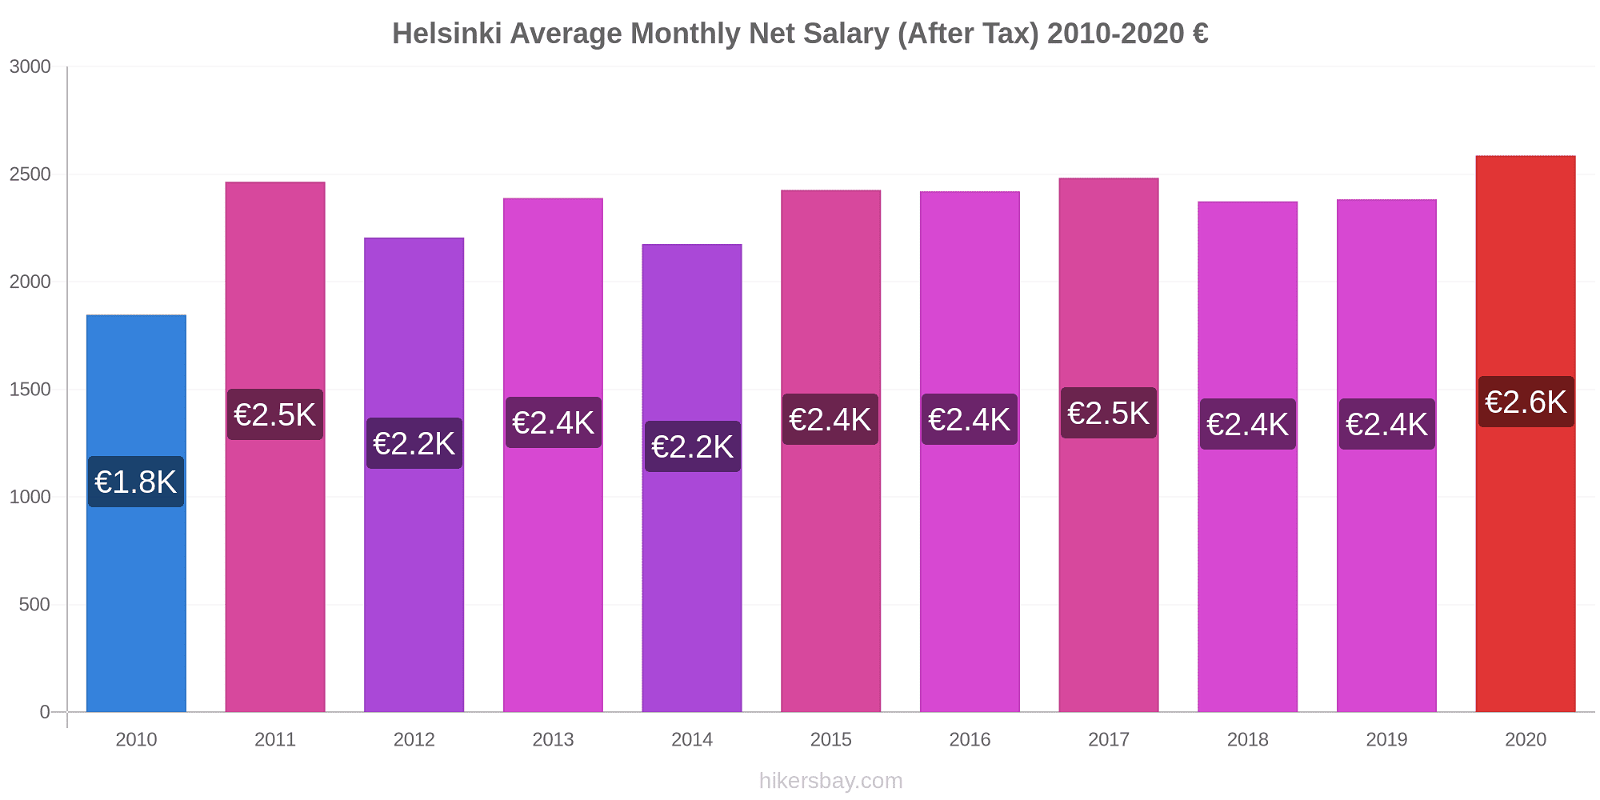 Helsinki price changes Average Monthly Net Salary (After Tax) hikersbay.com